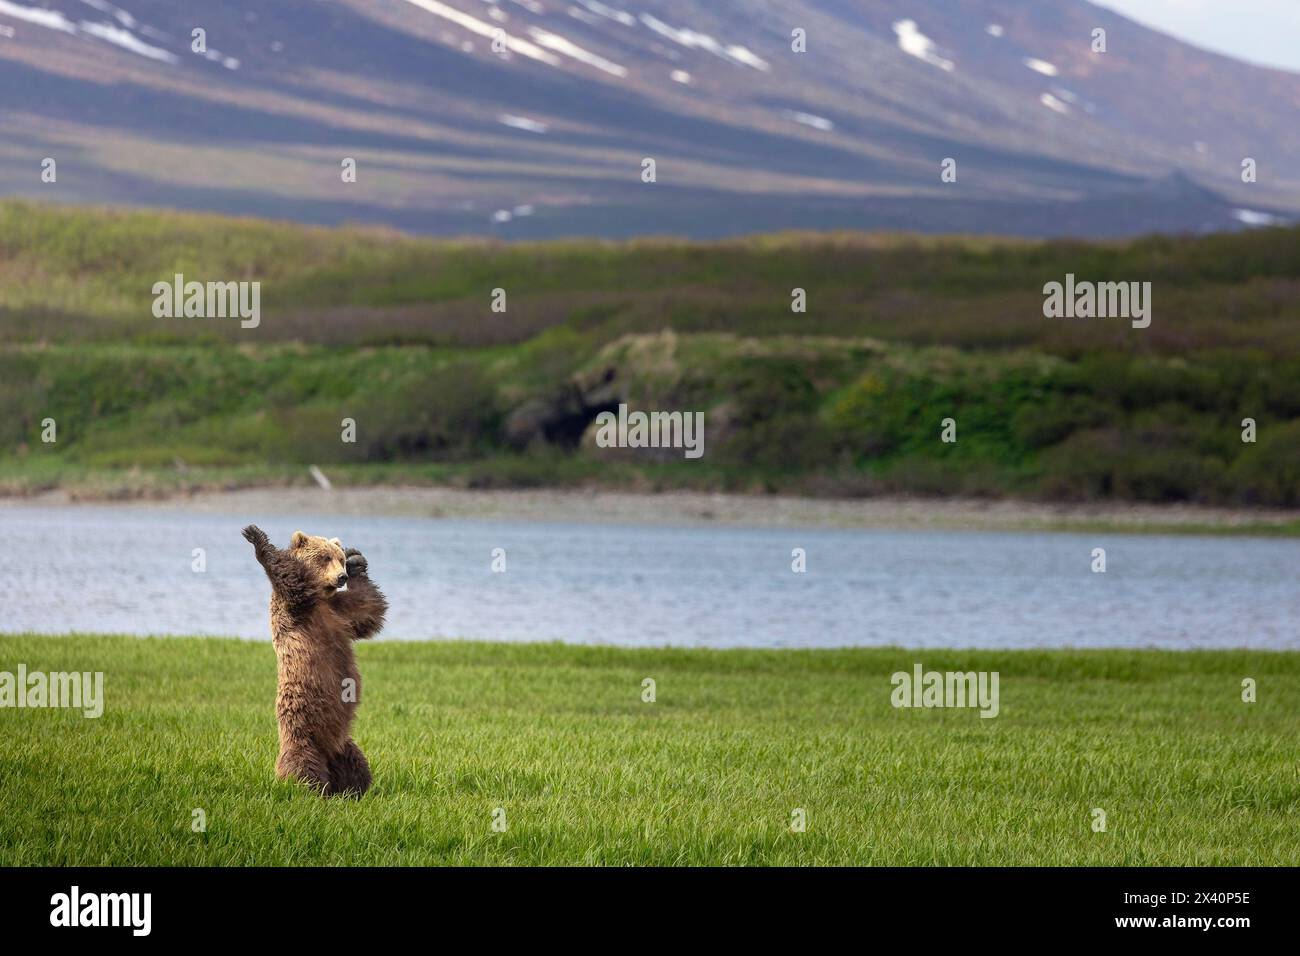 A brown bear (Ursus arctos) standing upright among the sedges, appears to dance to music only it can hear overlooking McNeil Cove in Southwestern A... Stock Photo